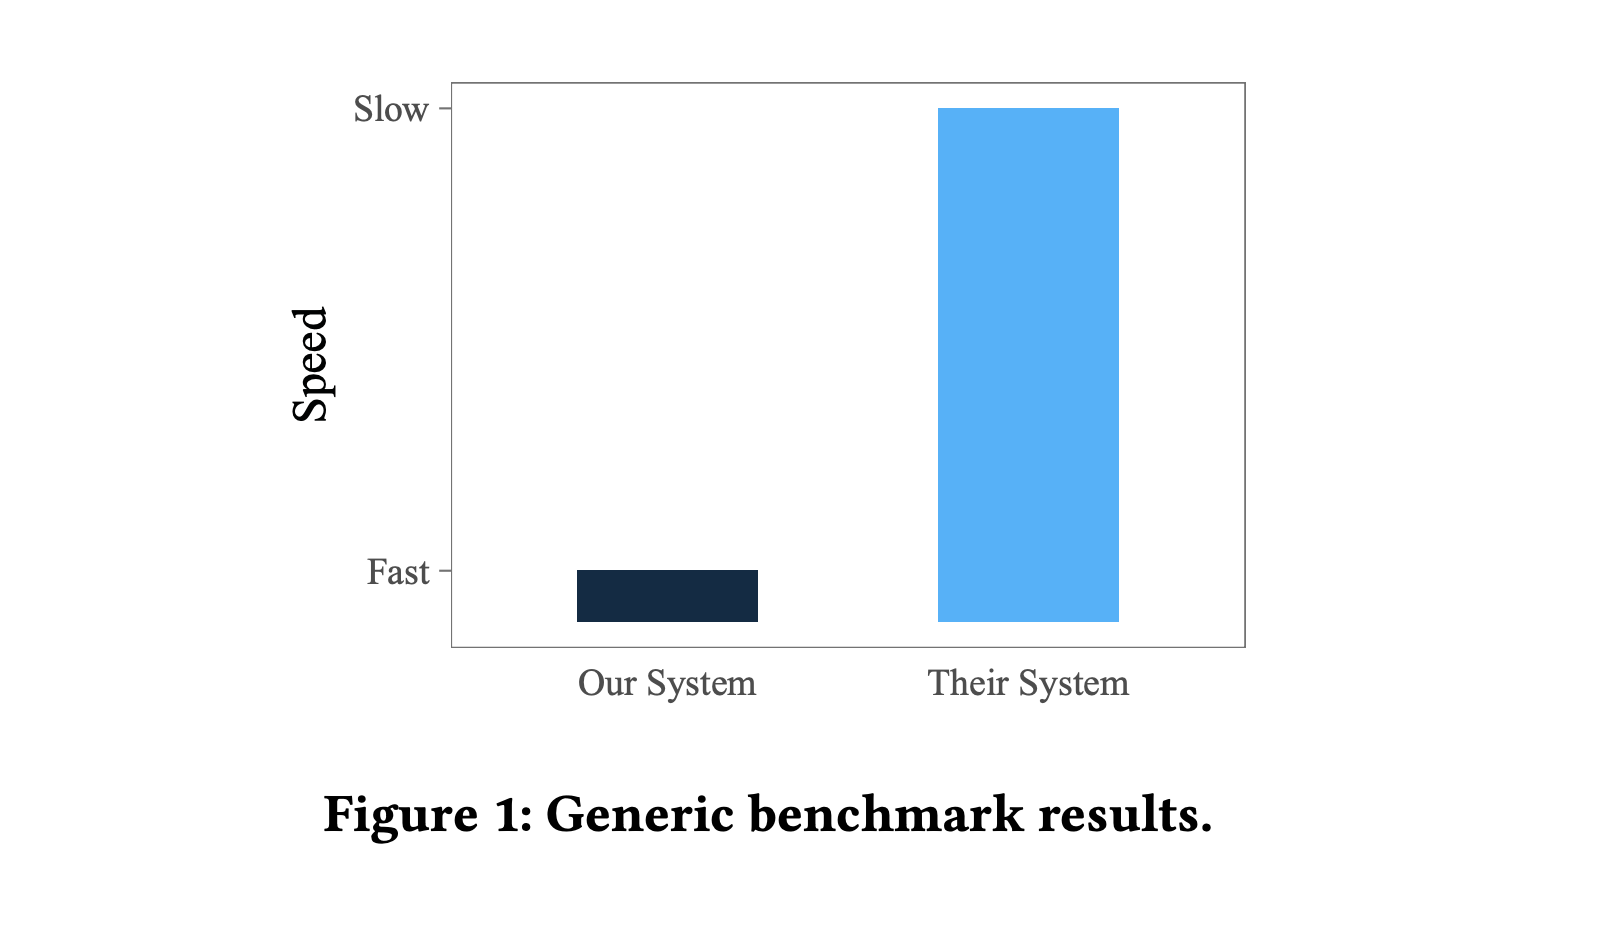 Generic benchmark result bar chart, showing 'fast' and 'slow' on the y-axis, and 'Our System' with a bar to 'fast' and 'Their System' with a bar up to 'slow'.